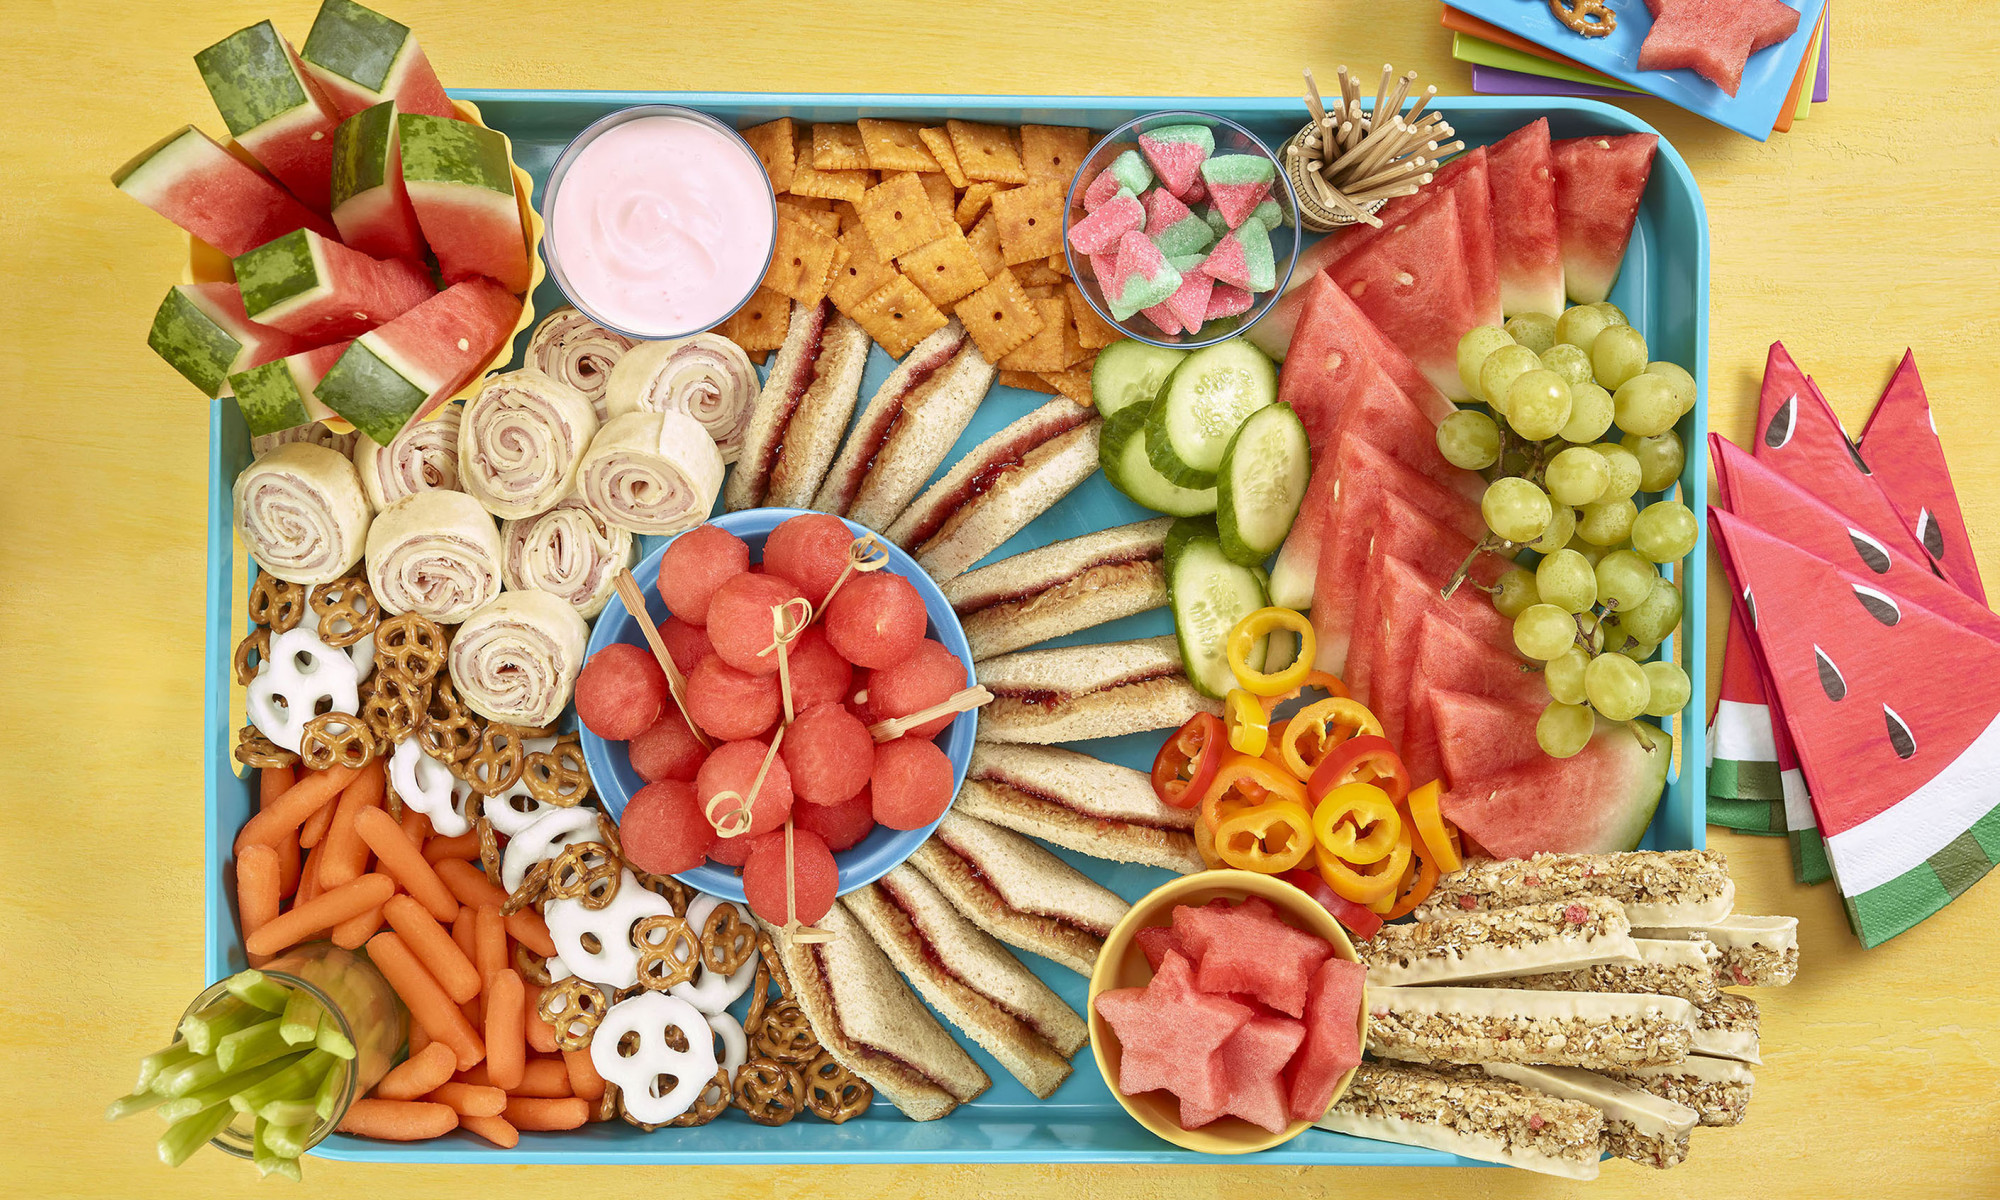 Kids grazing board overhead shot showing sandwiches, cracker, watermelon and other fruit